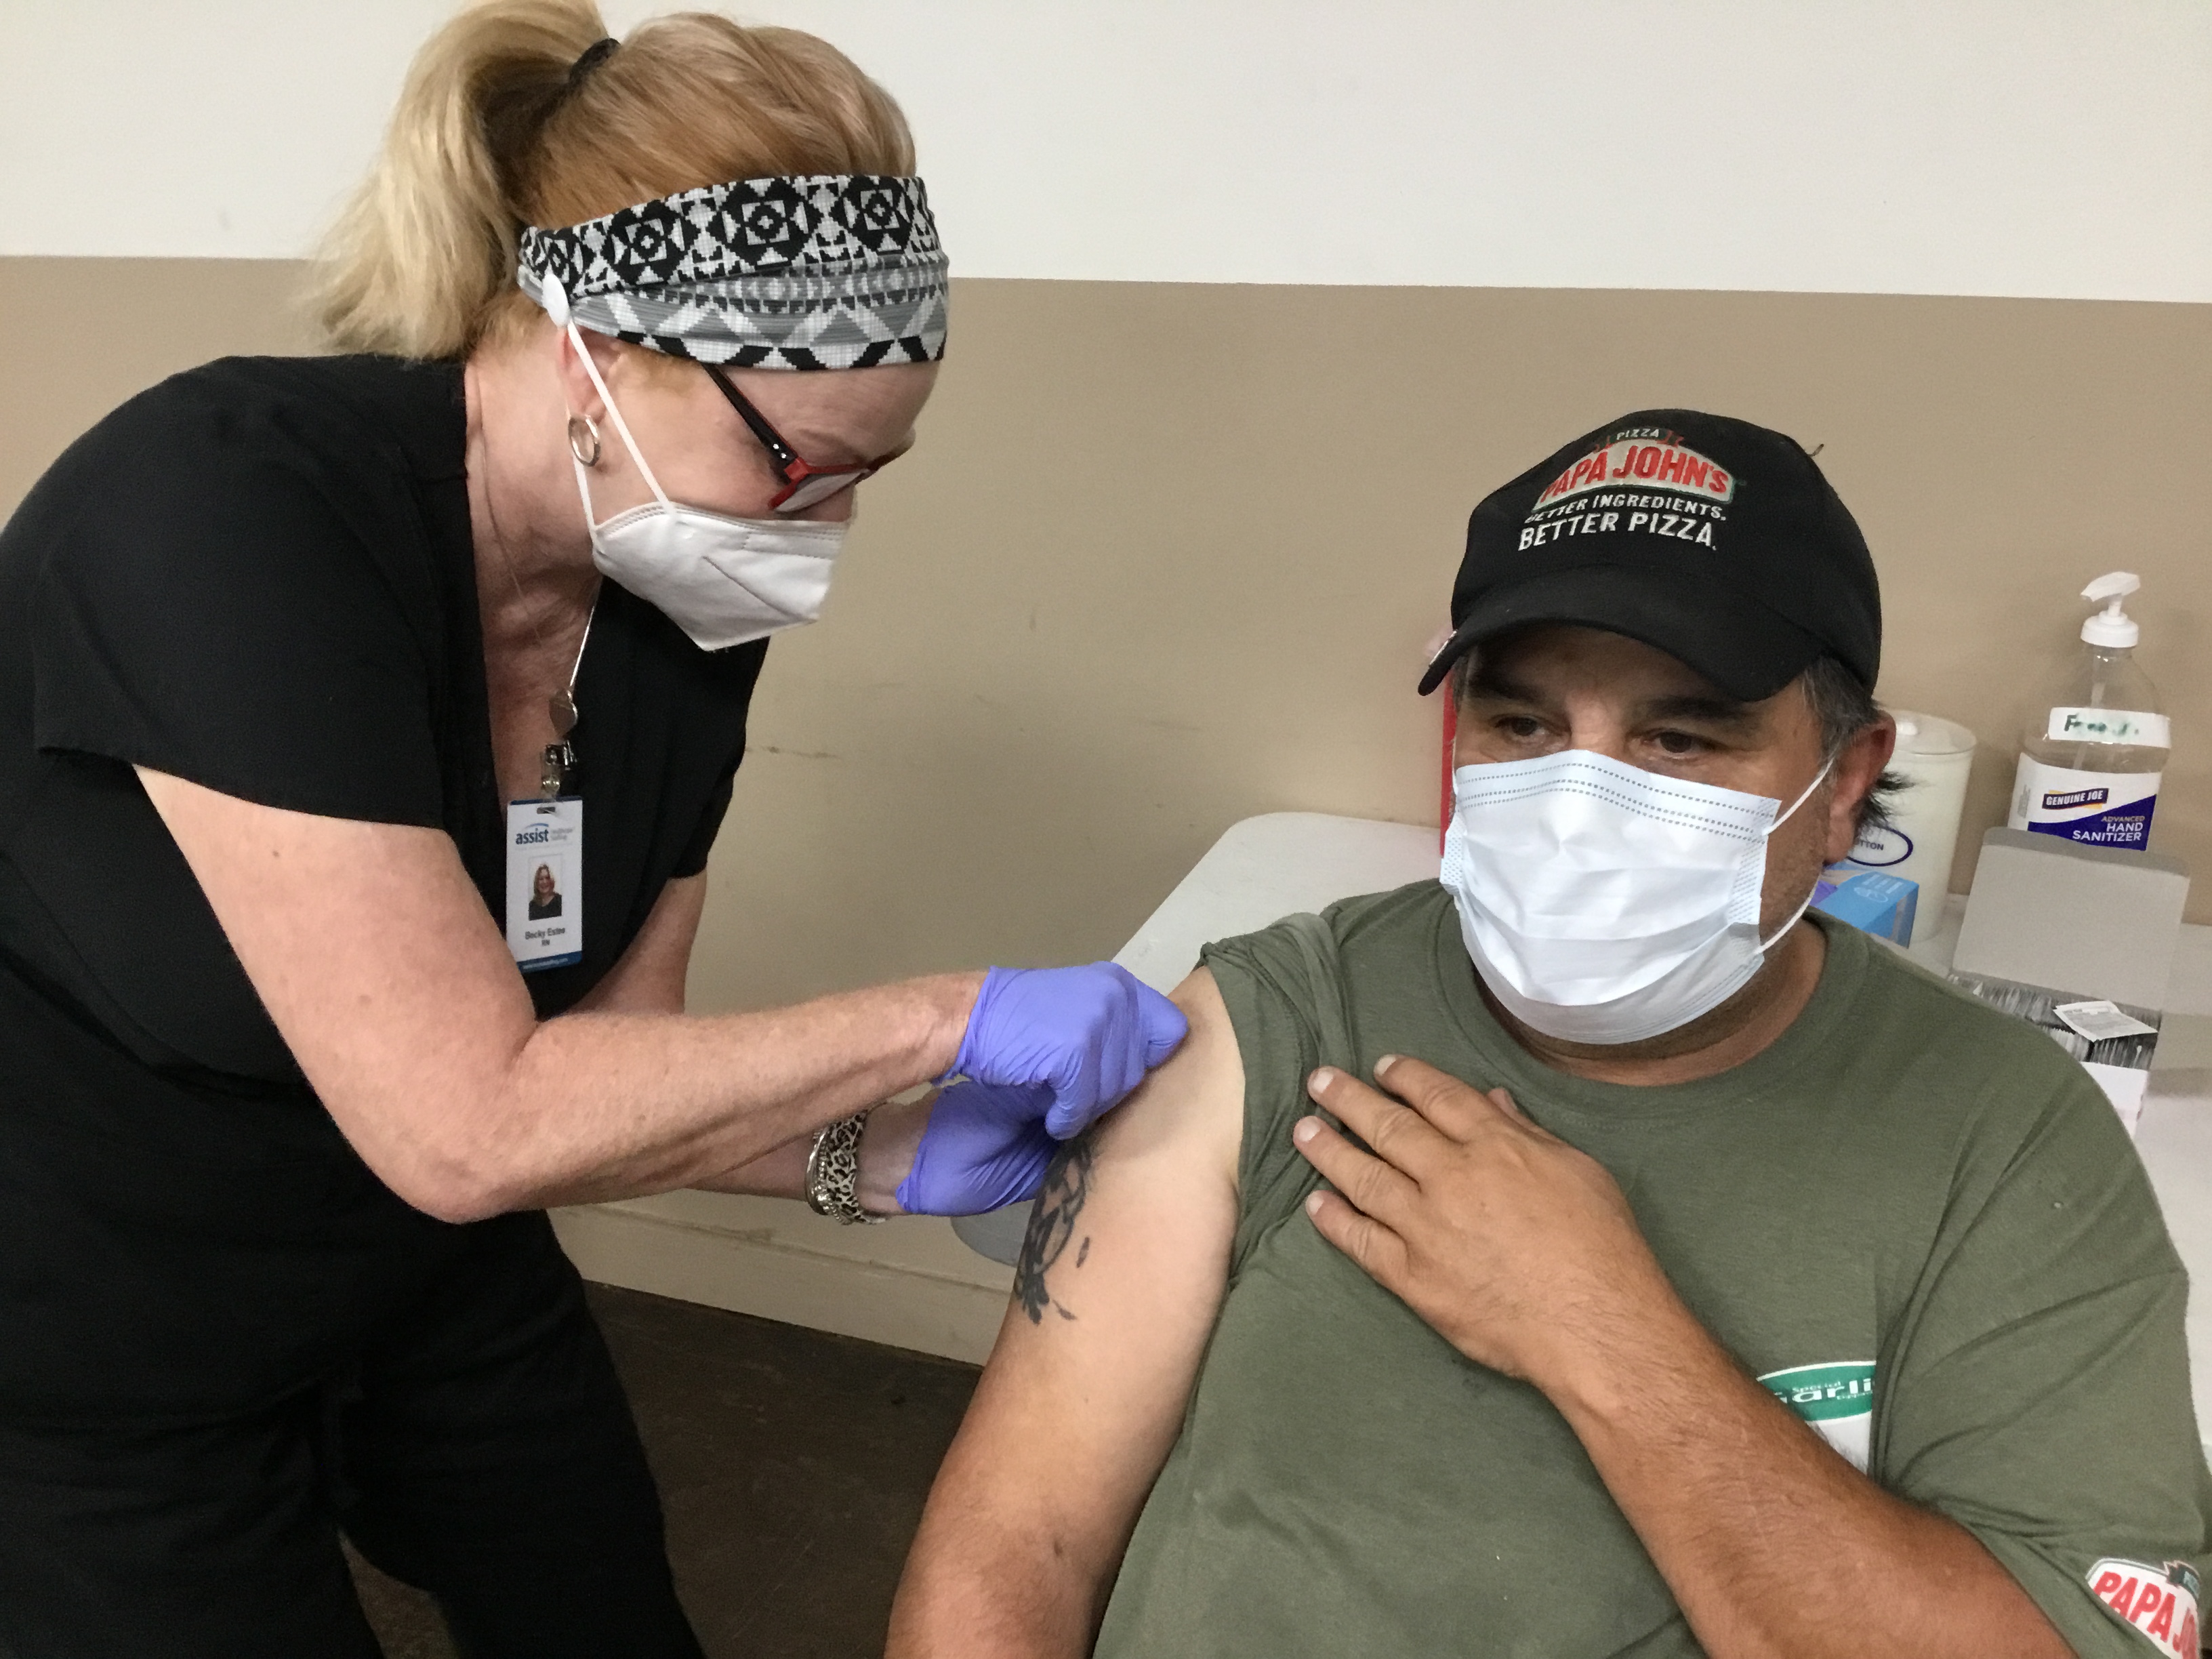 Fannin County resident Wilson Moss was the only person to take advantage of Fannin County Health Department’s COVID-19 Vaccination Clinic at the Kiwanis Club of Blue Ridge fairgrounds Saturday, September 18. Administering the shot is Becky Estes.